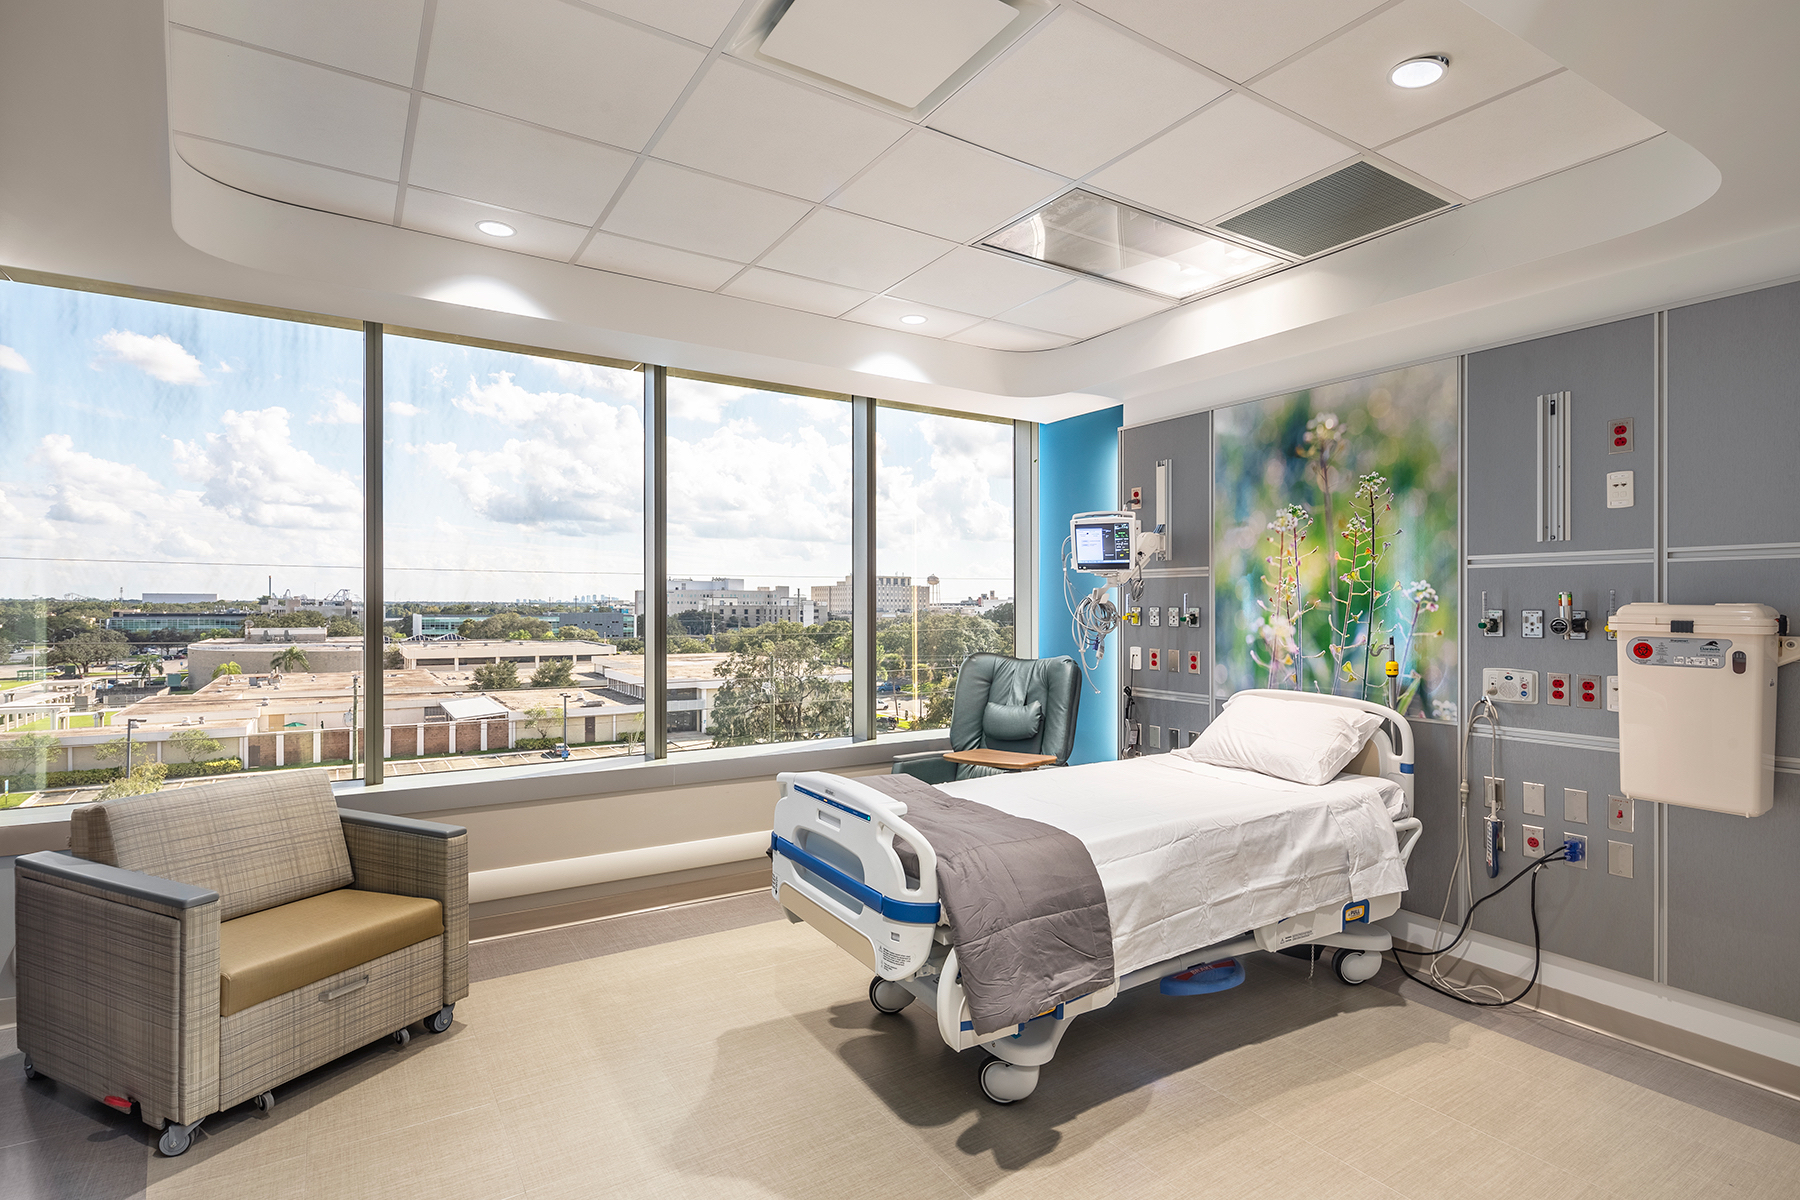 Top 80 Hospital Facility Engineering Firms for 2022